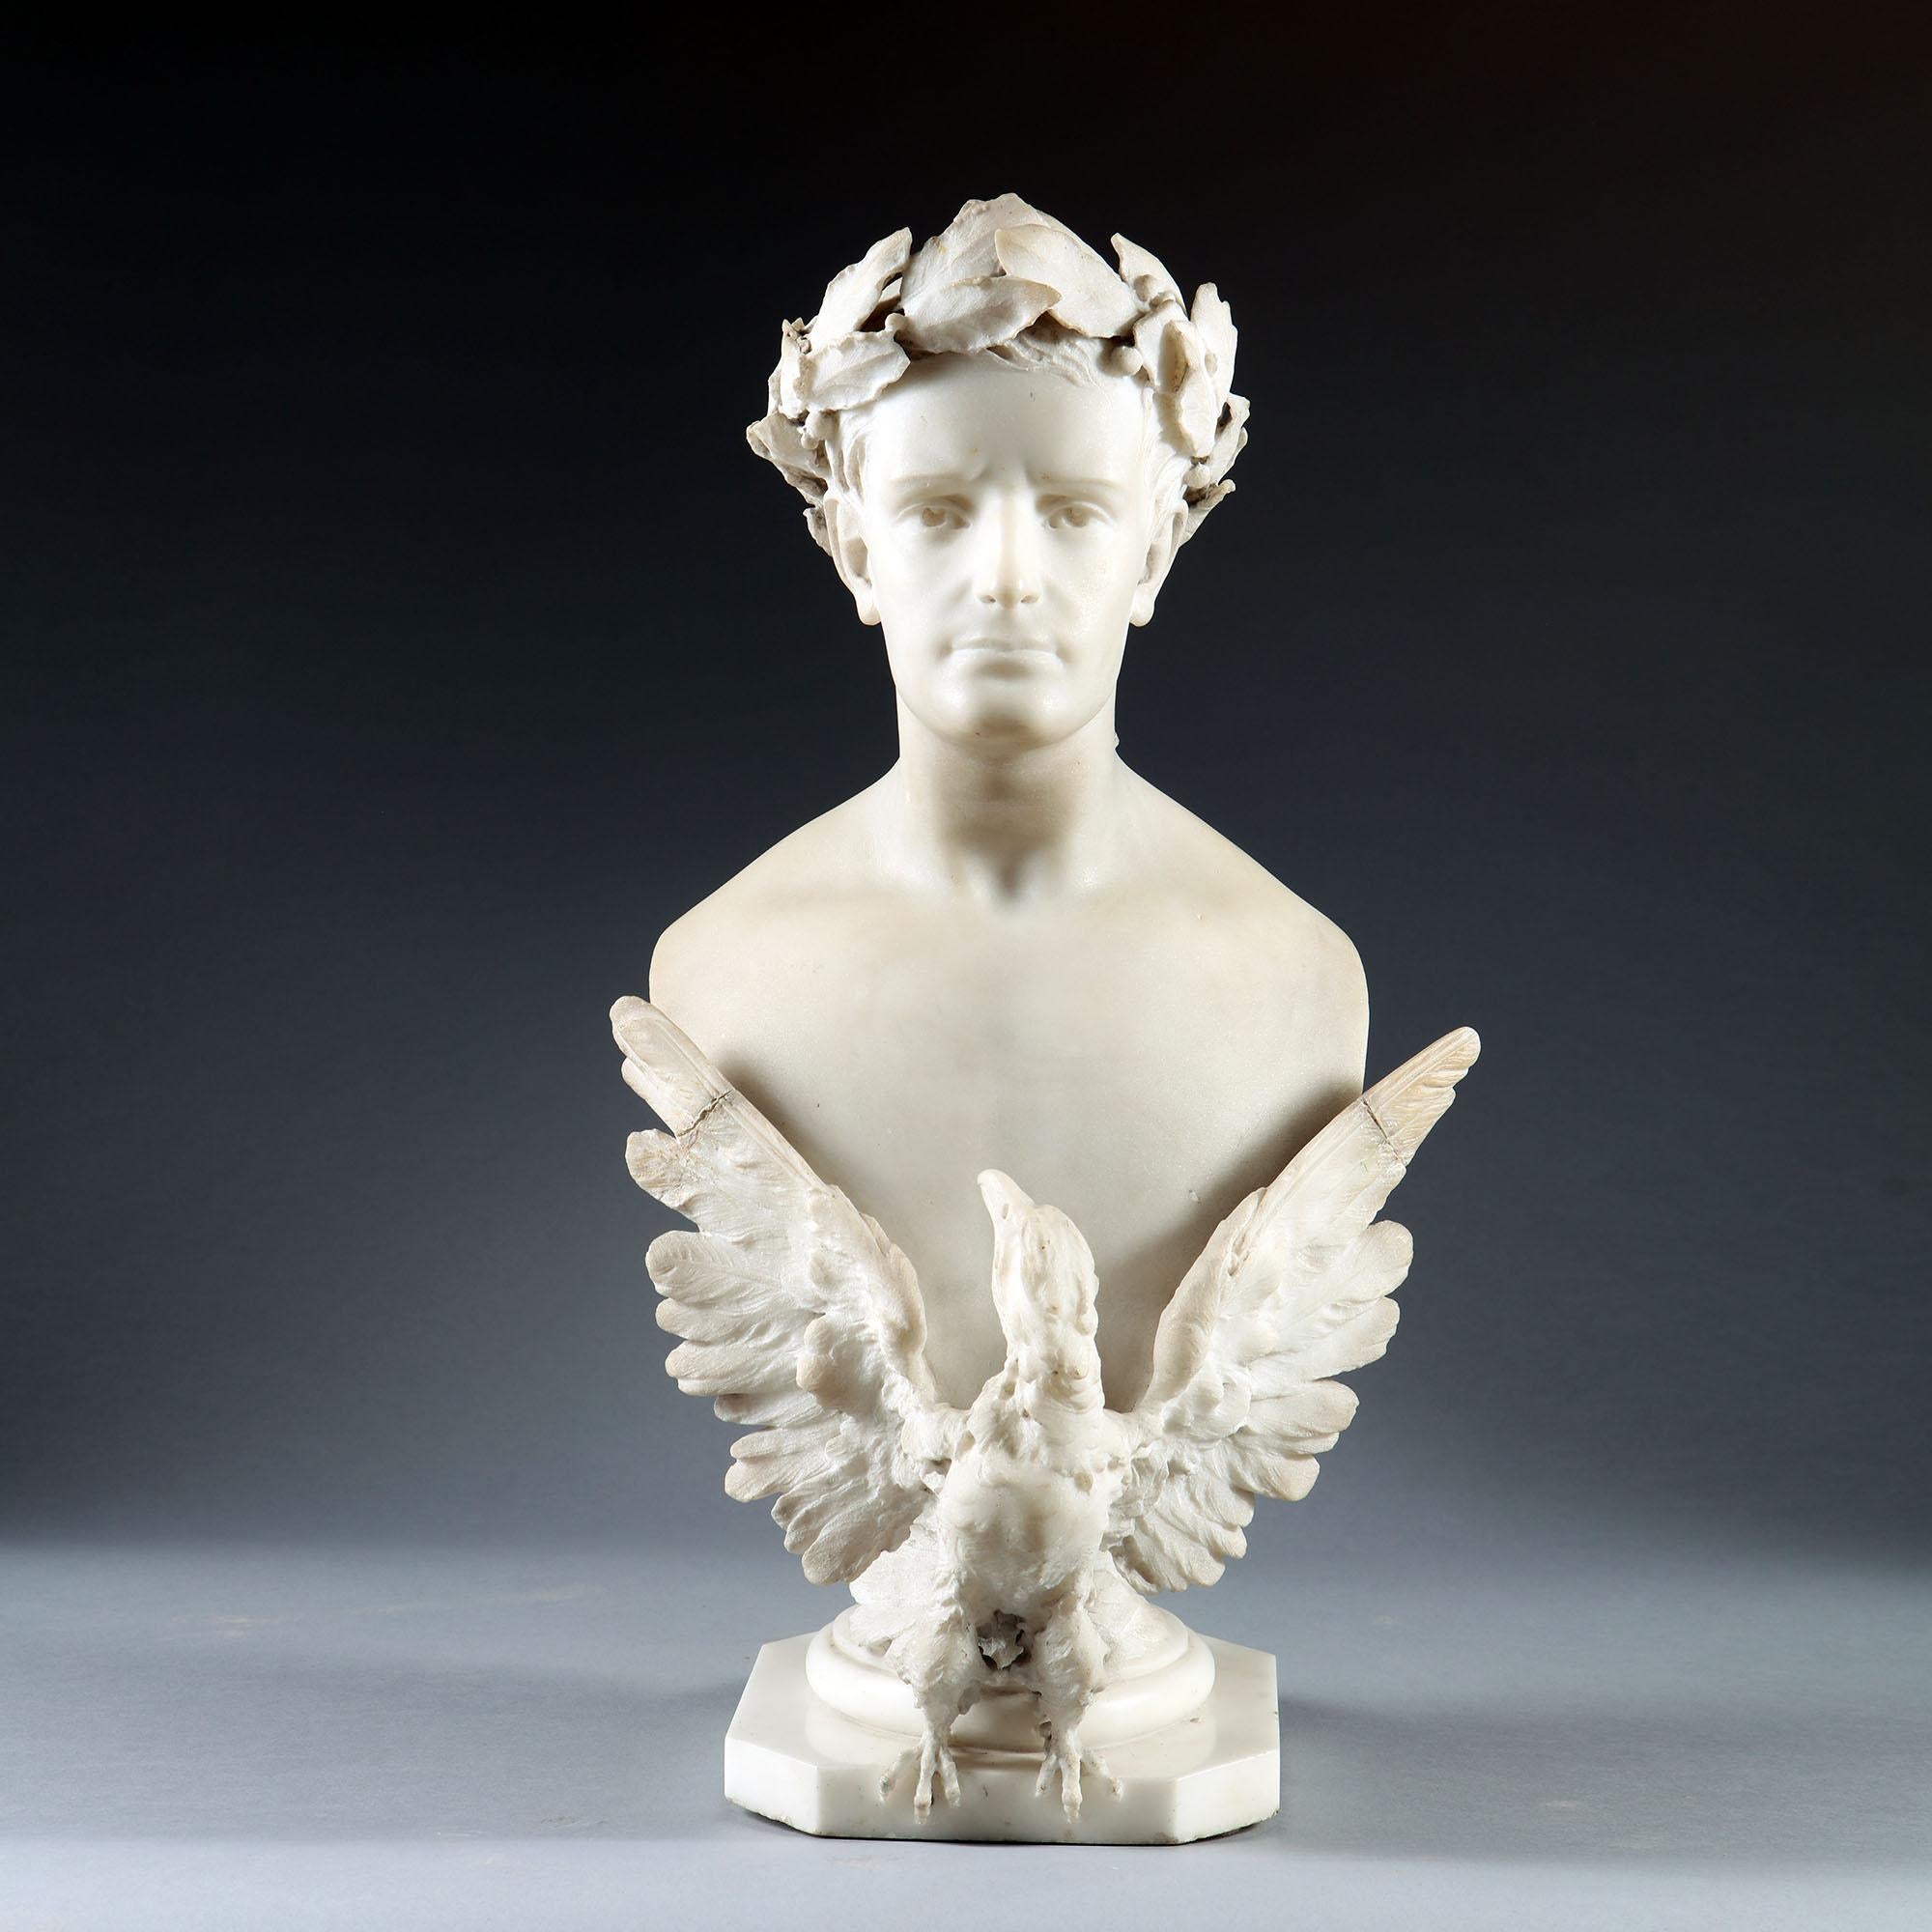 A carved marble bust of Napoleon, early to mid-19th century, depicted wearing a laurel crown and with an imperial spread eagle across his chest, on a circular to square turned socle.

